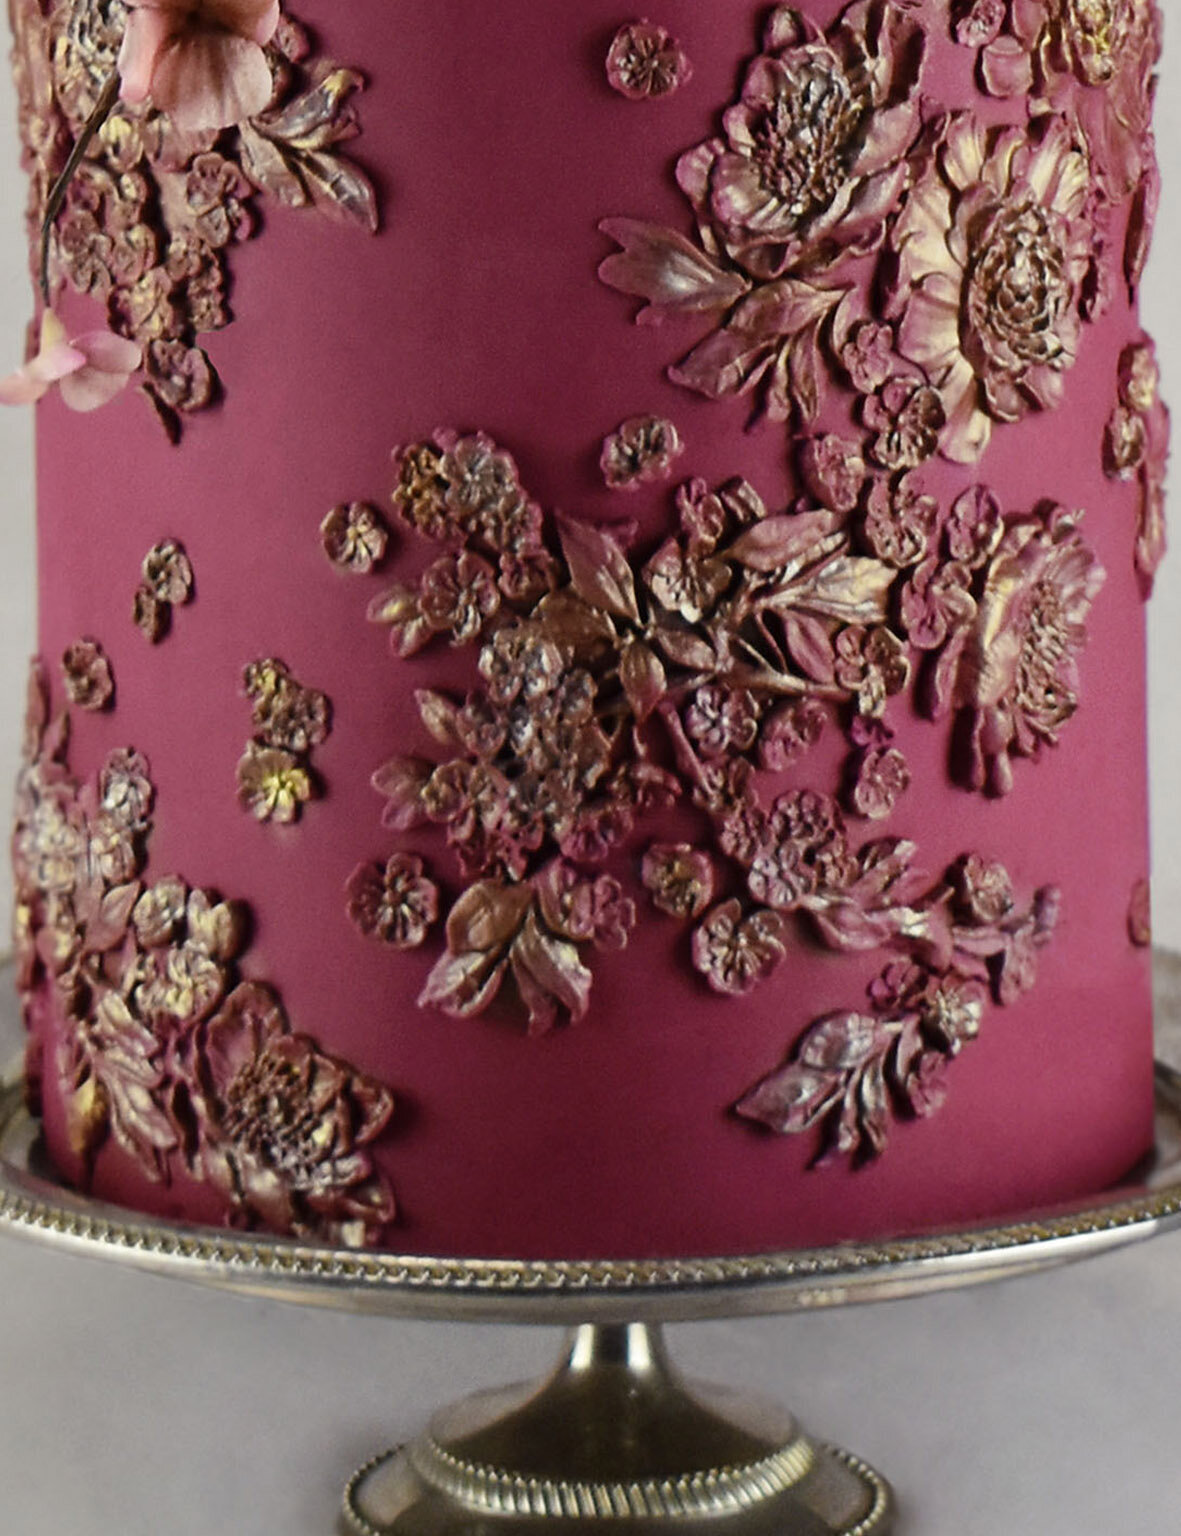 Bas relief floral detail on a burgundy wedding cake